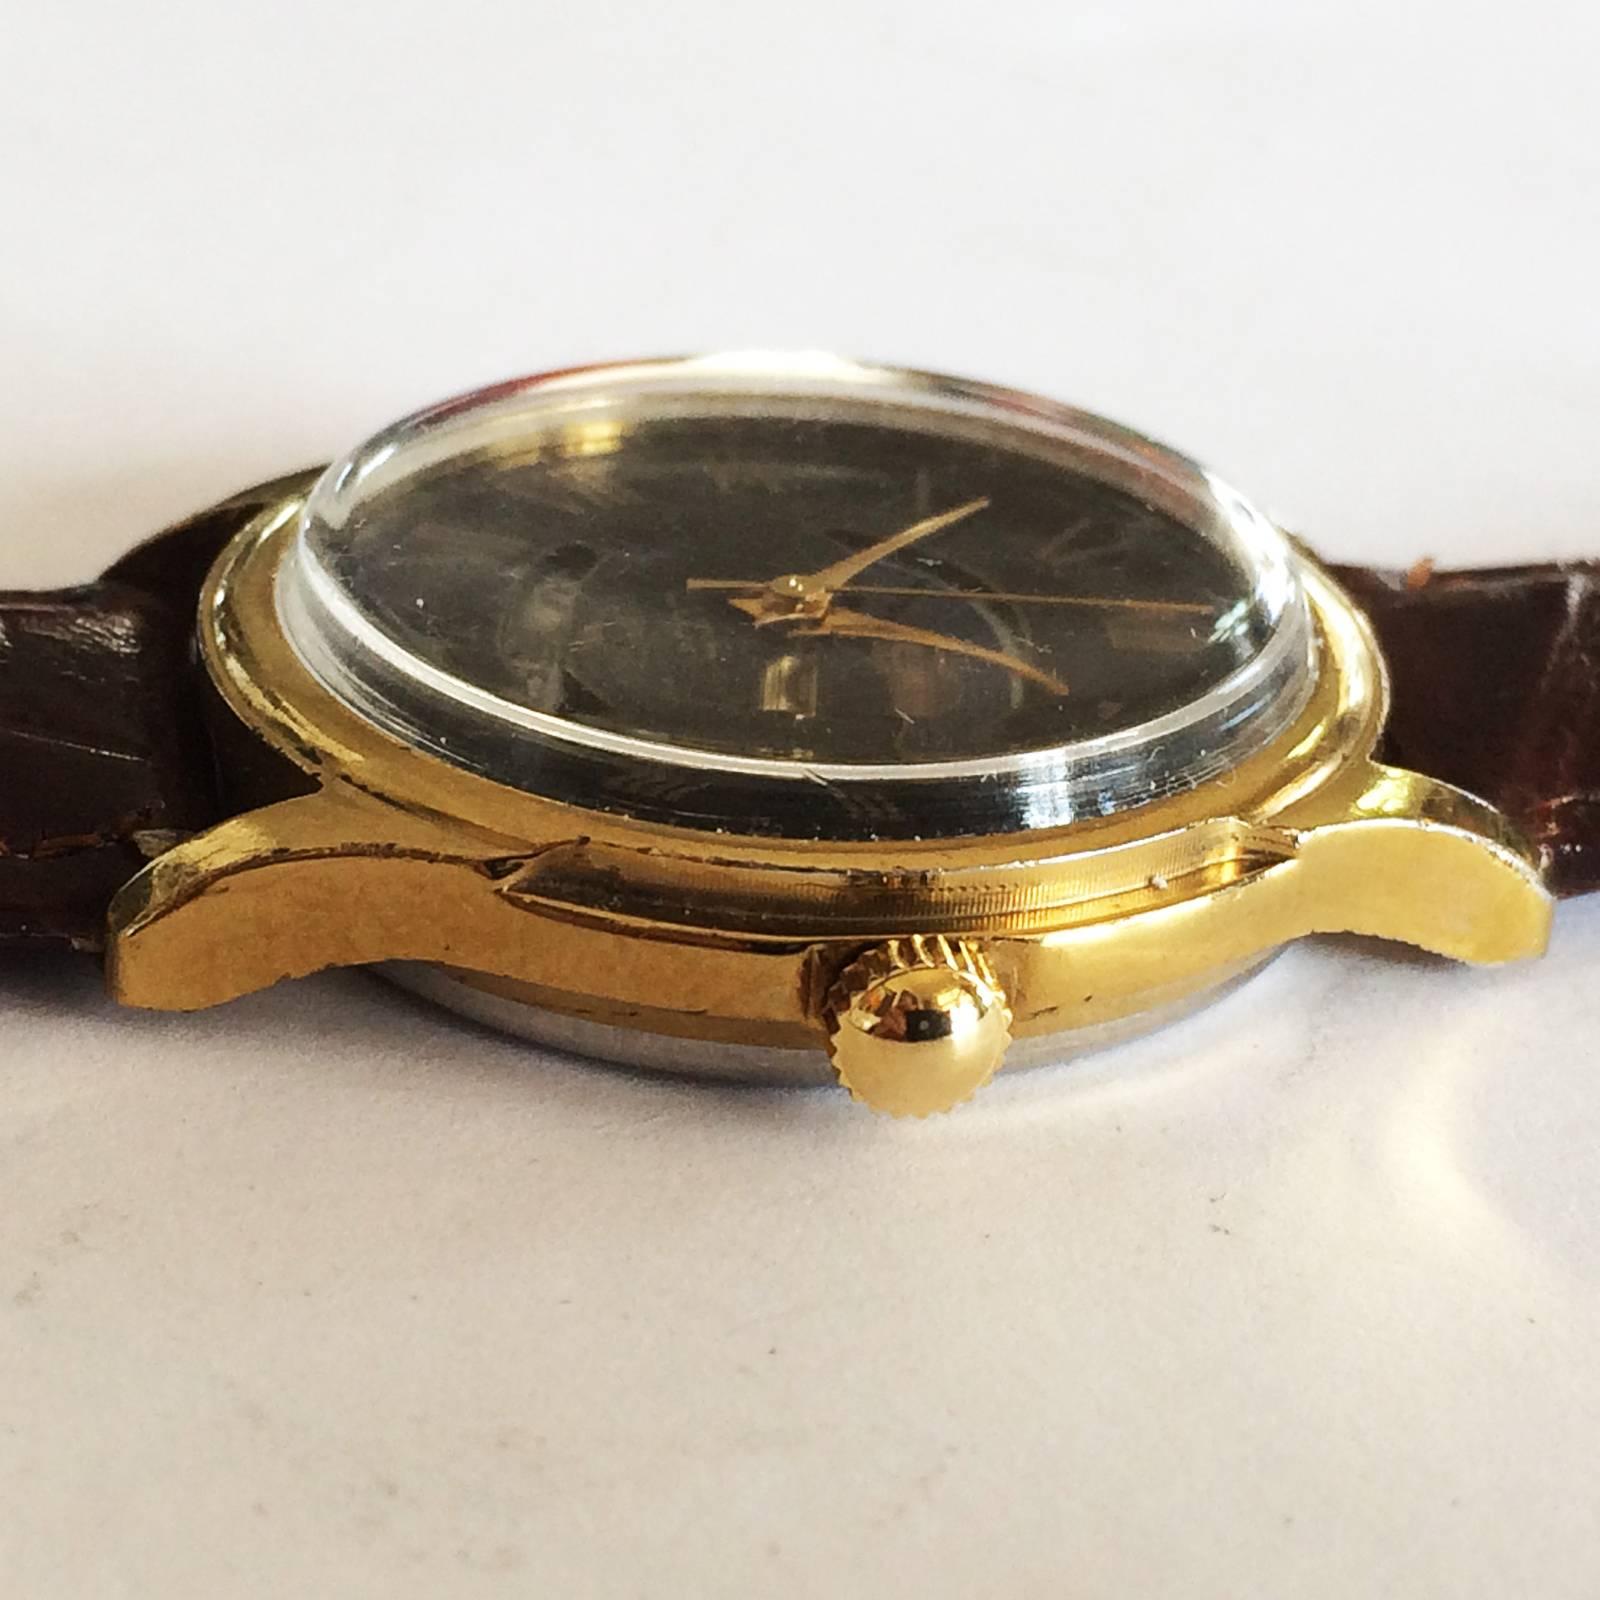 Russian Wrist Watch with Moon / Sun phase and Date, by “Luch”, “Made in Belarus” USSR / CCCP. Early Quartz movement, completely overhauled, serviced, timed and new battery by our Watchmaker and in perfect working order, with Heavy Russian gold plate